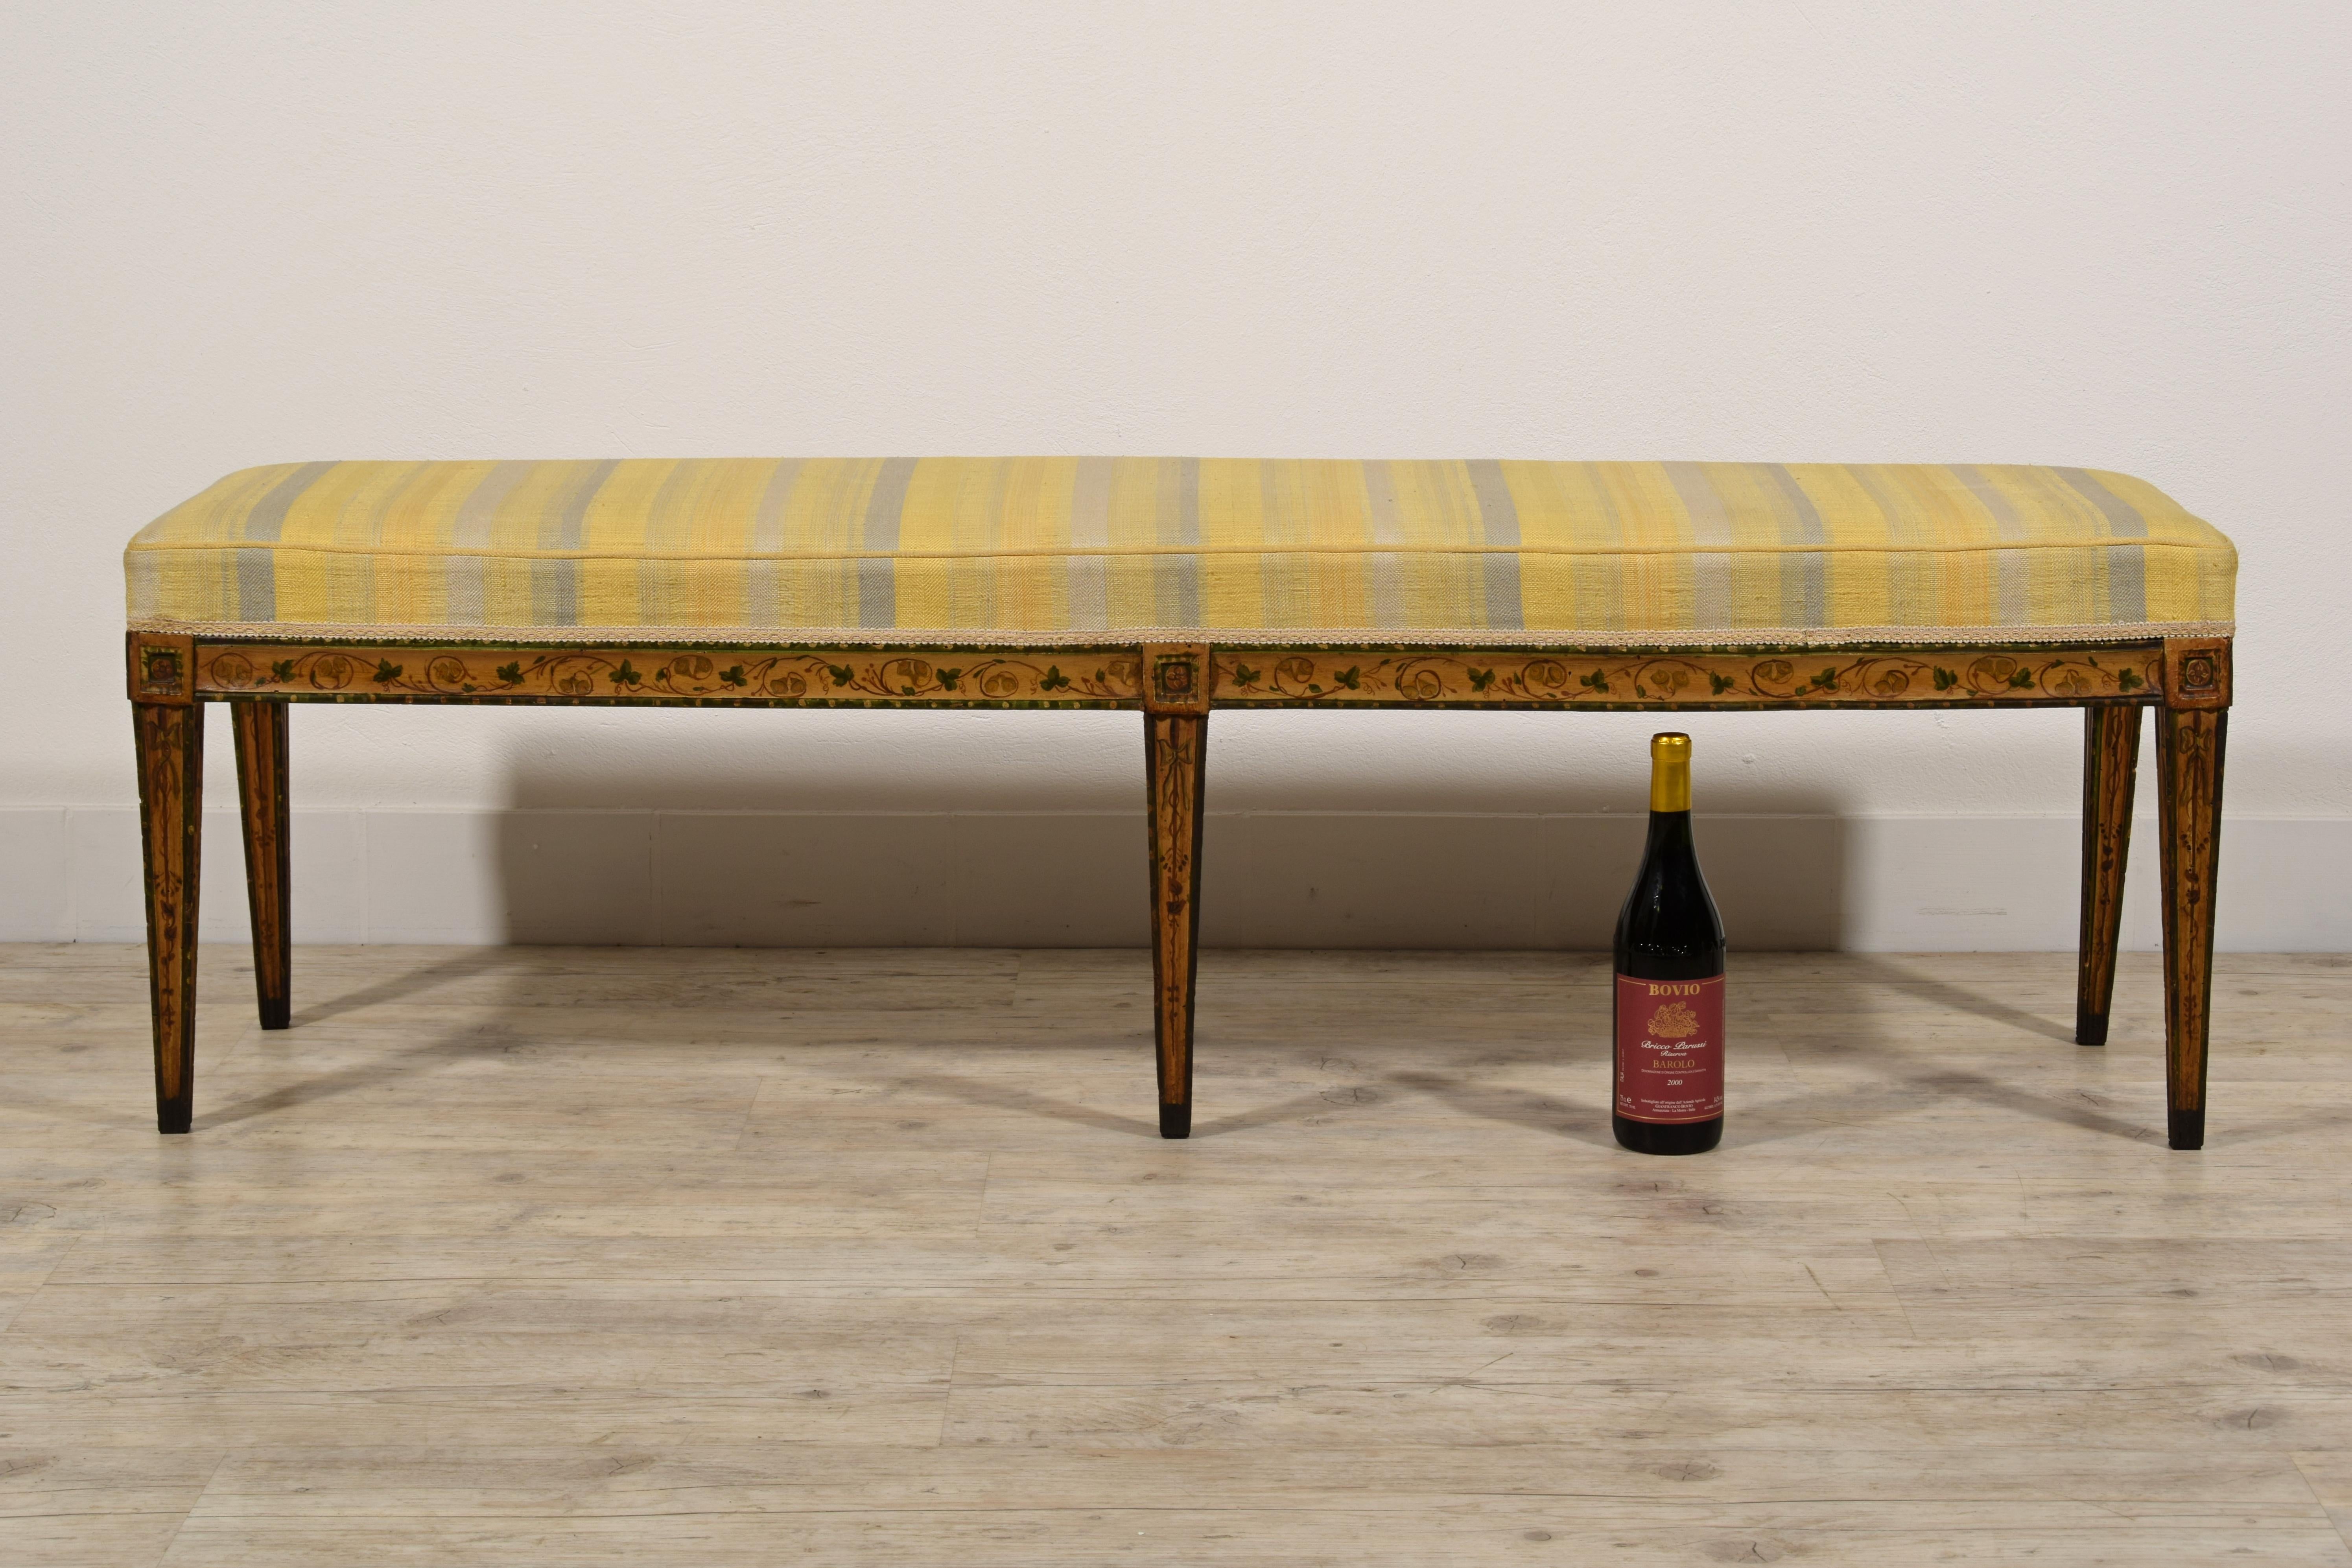 Hand-Painted 19th Century, Italian Six-legged Centre Bench Lacquered Wood with Ramage Motive